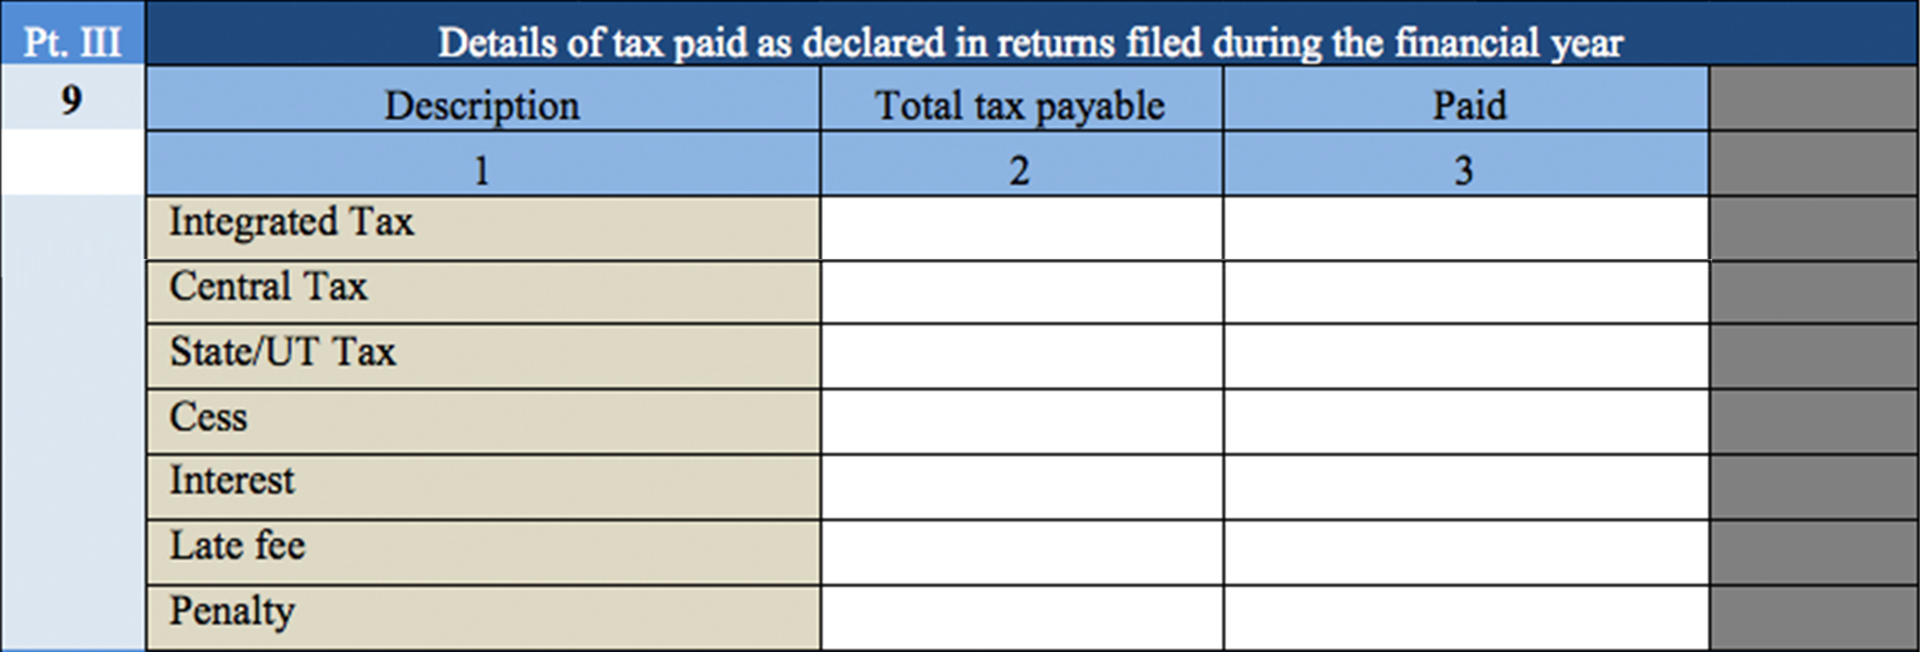 Details of tax paid as declared in returns filed during financial year for filing GSTR 9A